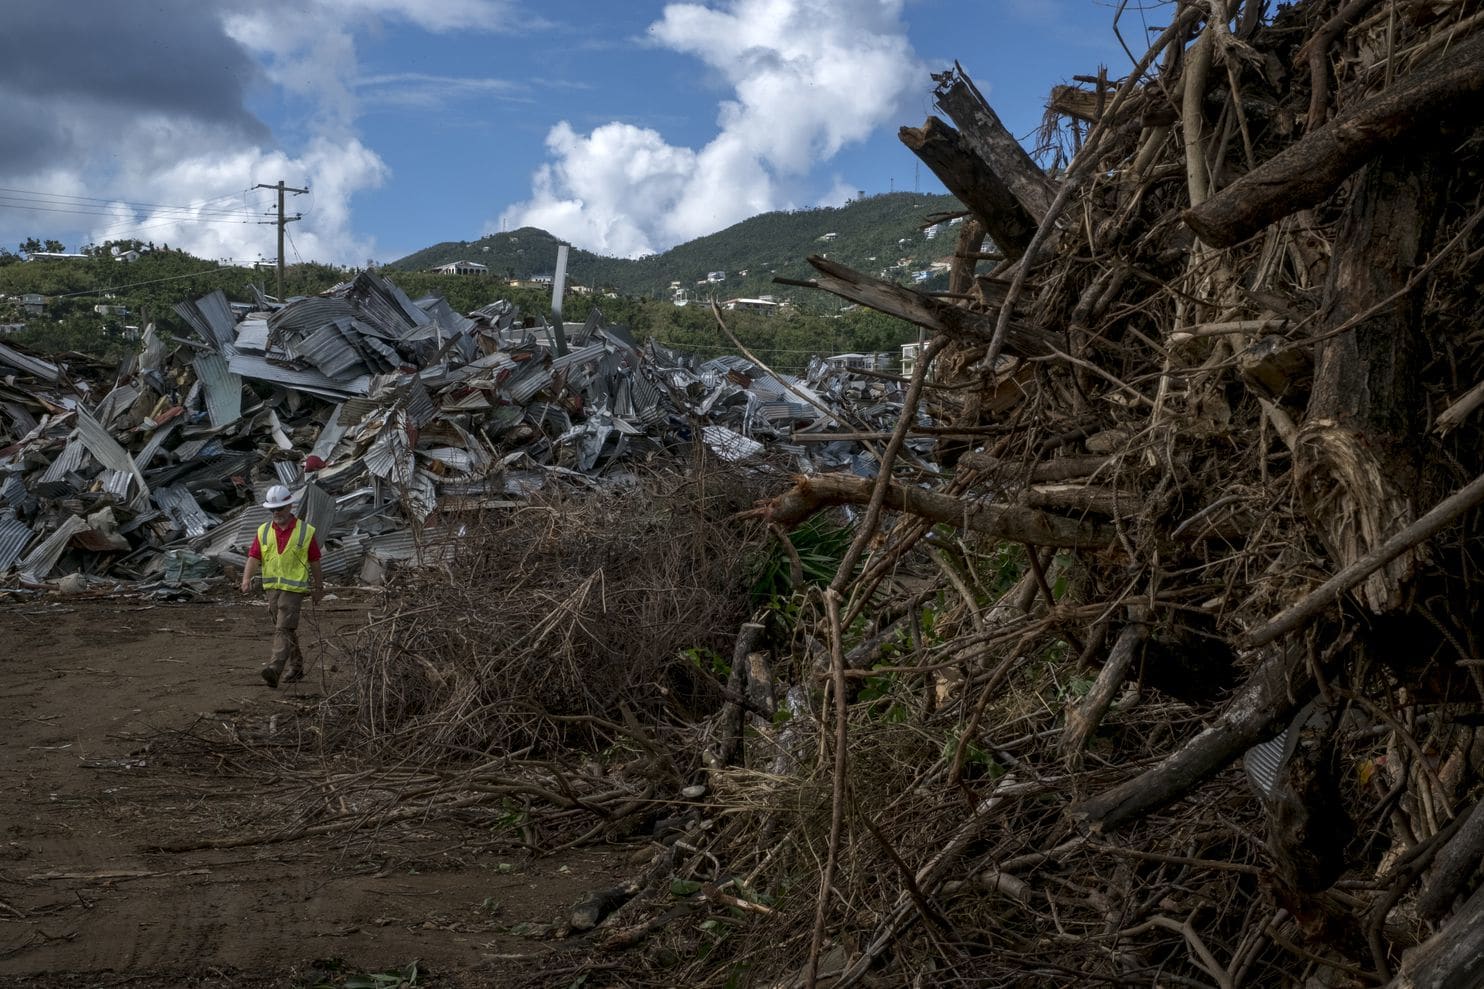 Federal Deadline Pushed Back 60 Days To Remove Mountains of Hurricane Debris in Territory